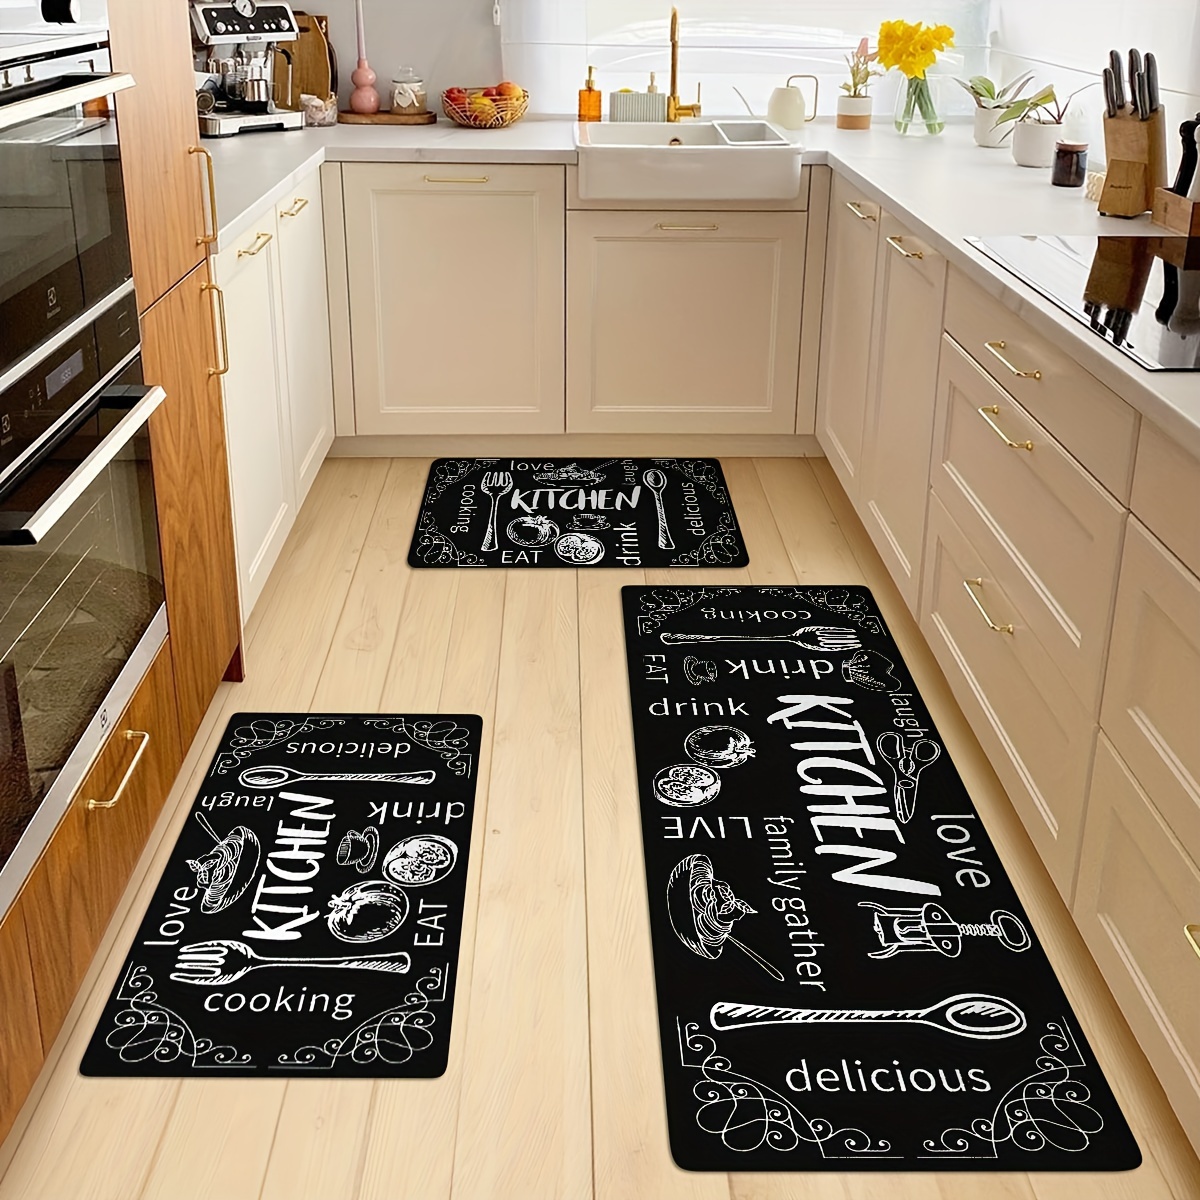 omezin Blue and Gold Kitchen Rugs Set 2 PCS Anti Fatigue Non Skid Mats  Waterproof Cushioned Kitchen Sink Mats Padded Kitchen Mats for Standing  Floor, Laundry, Bathroom, Office 